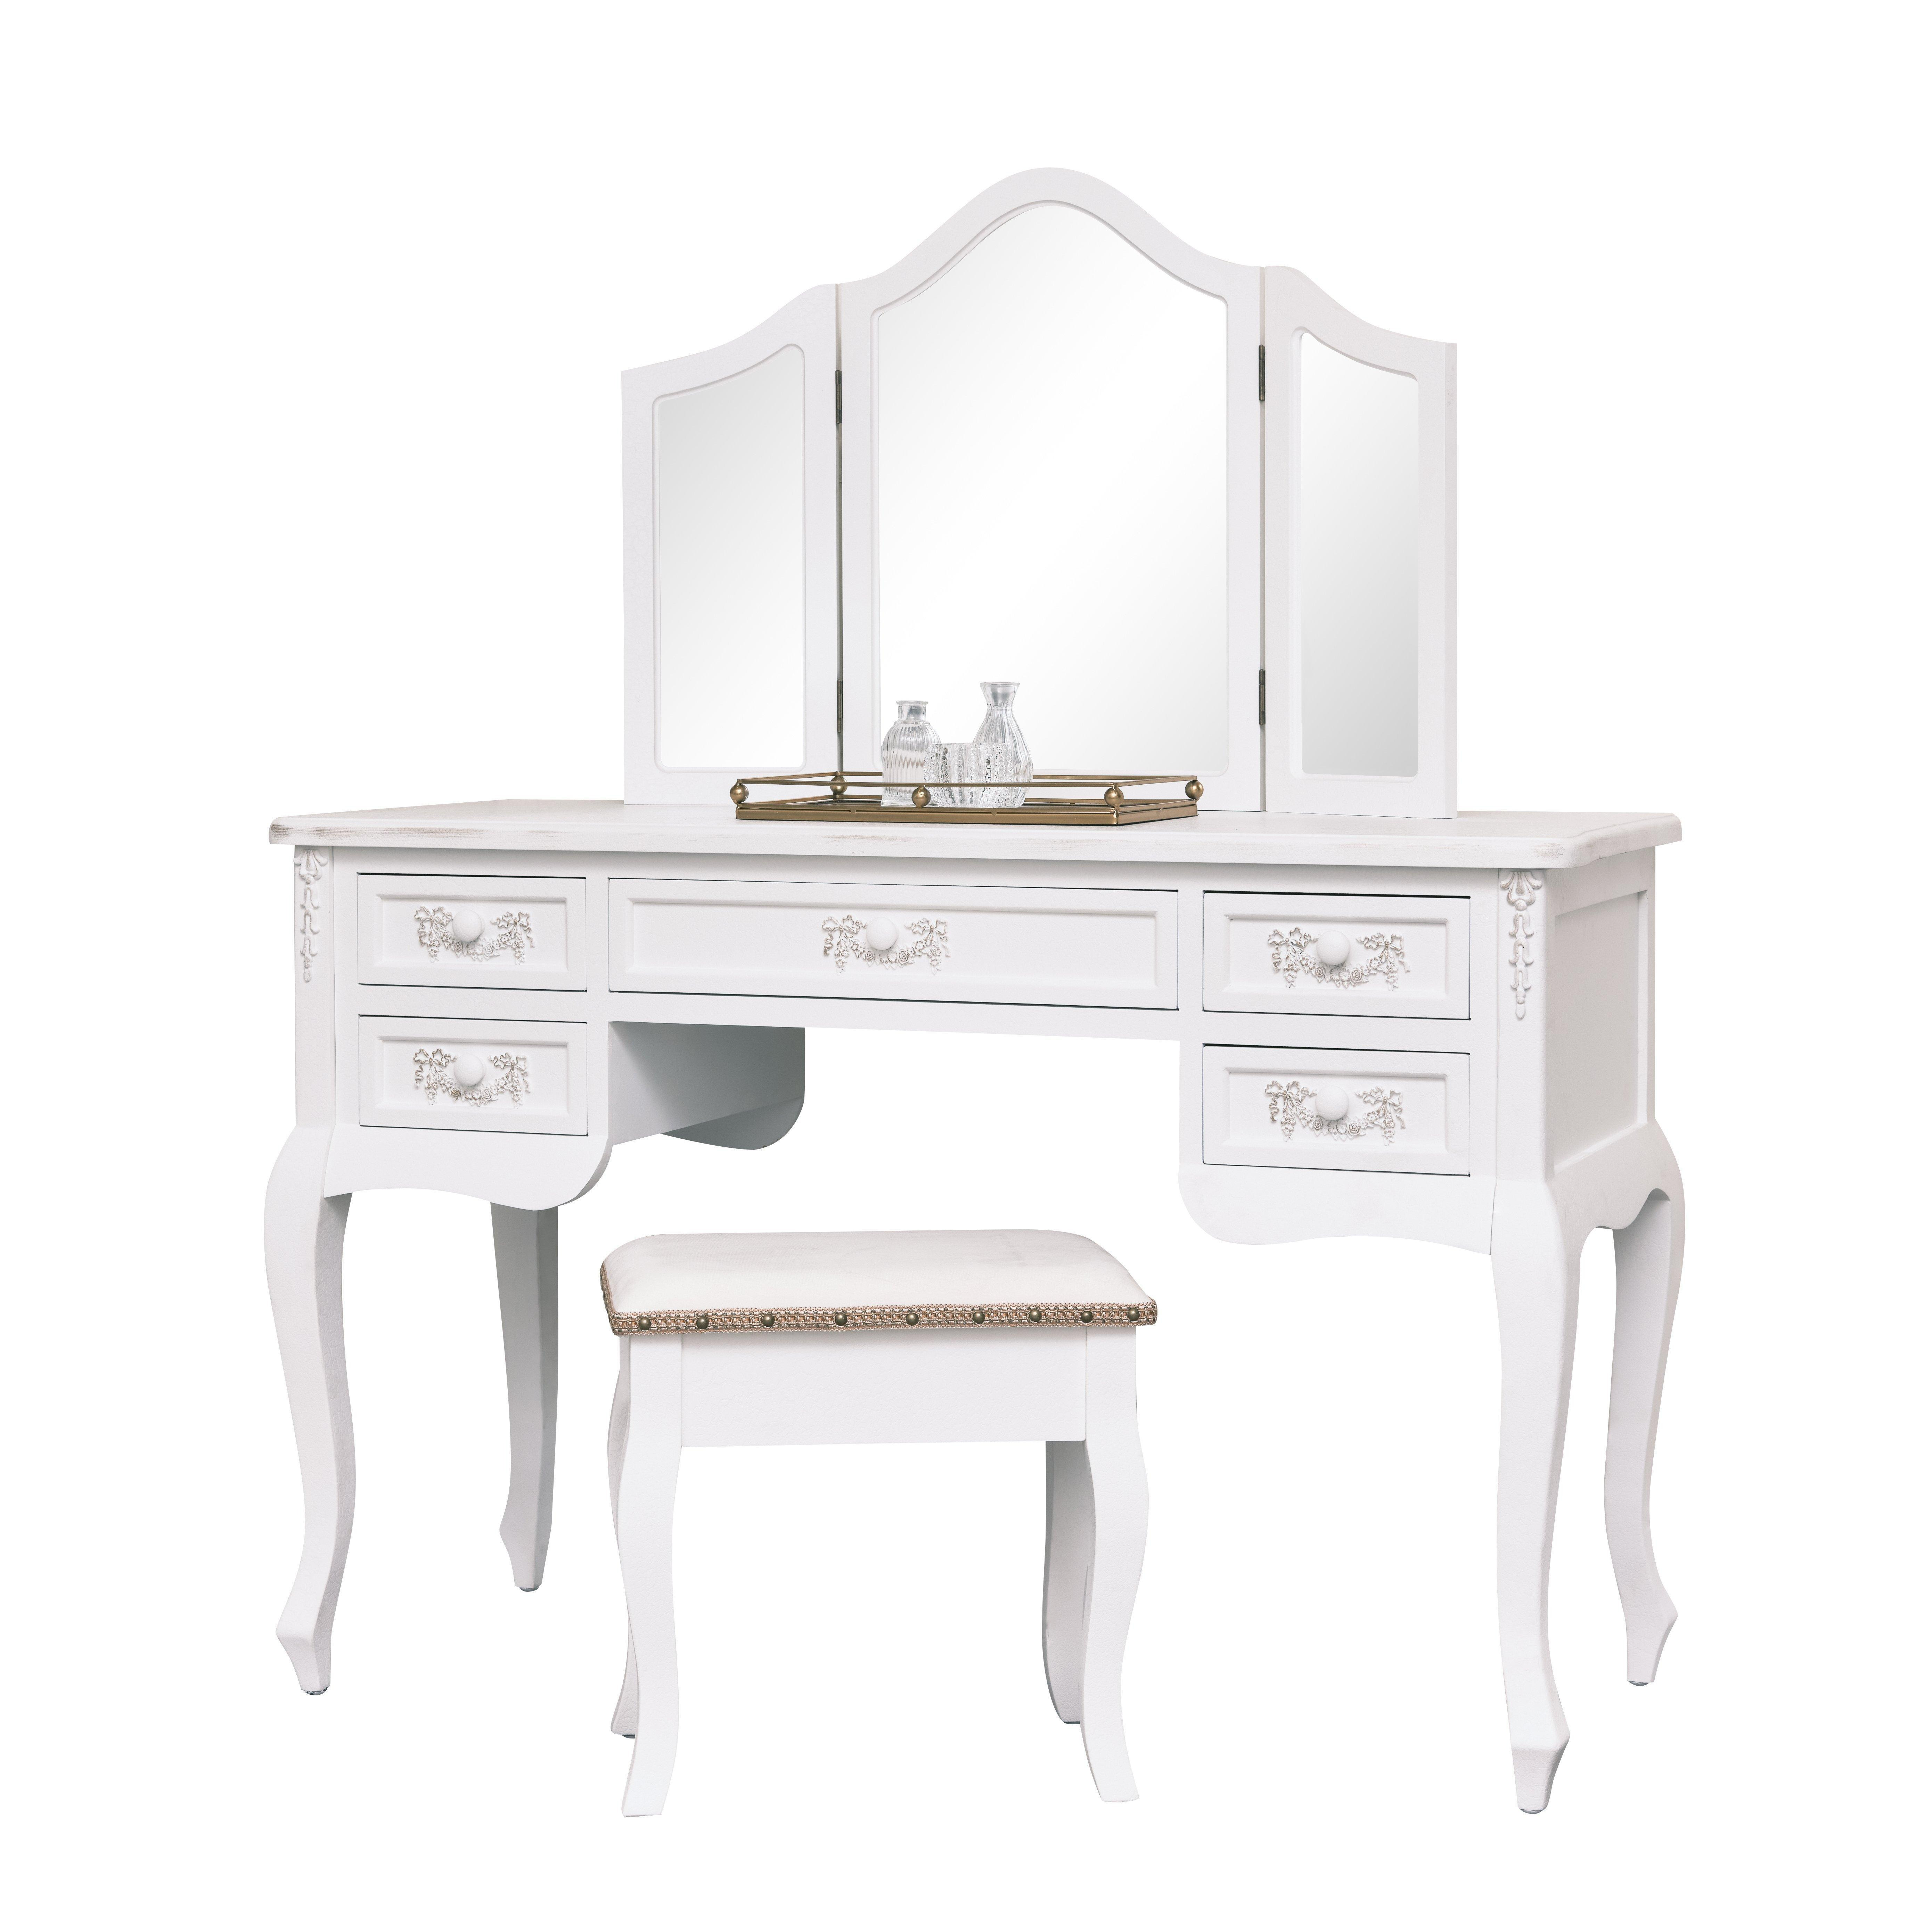 Antique White Dressing Table Desk With Triple Mirror And Stool - Pays Blanc Range - image 1